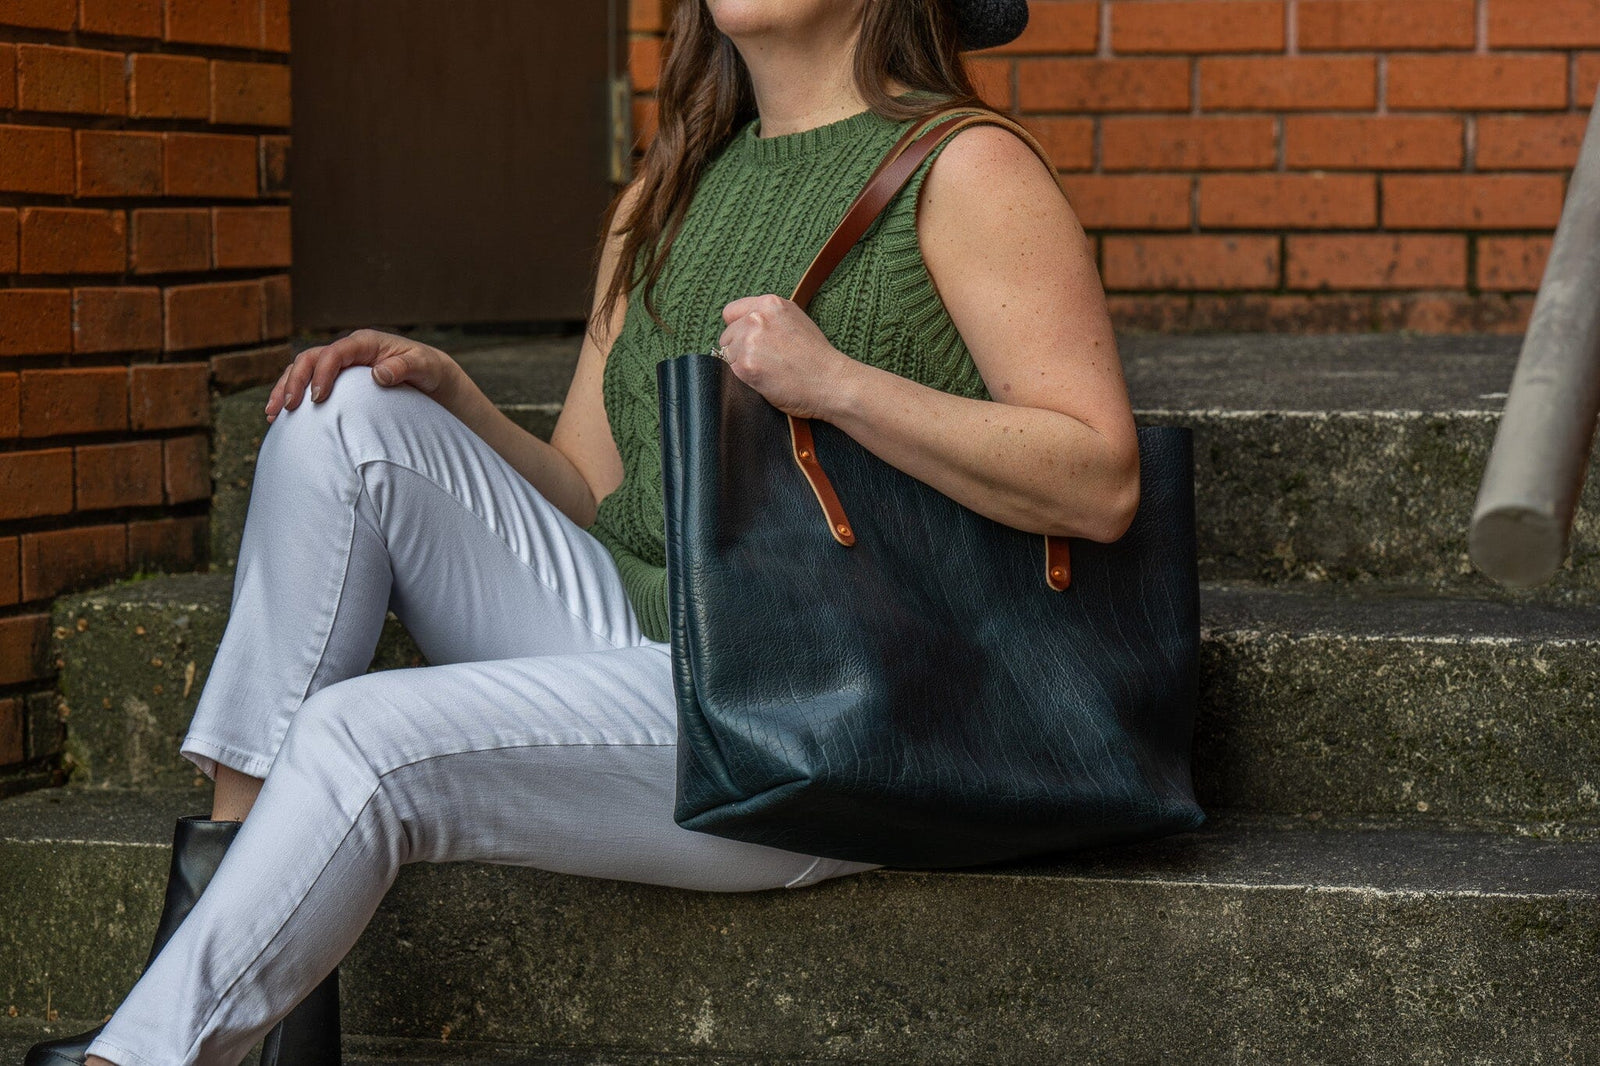 Fore Street Tote Bag, Leather Tote